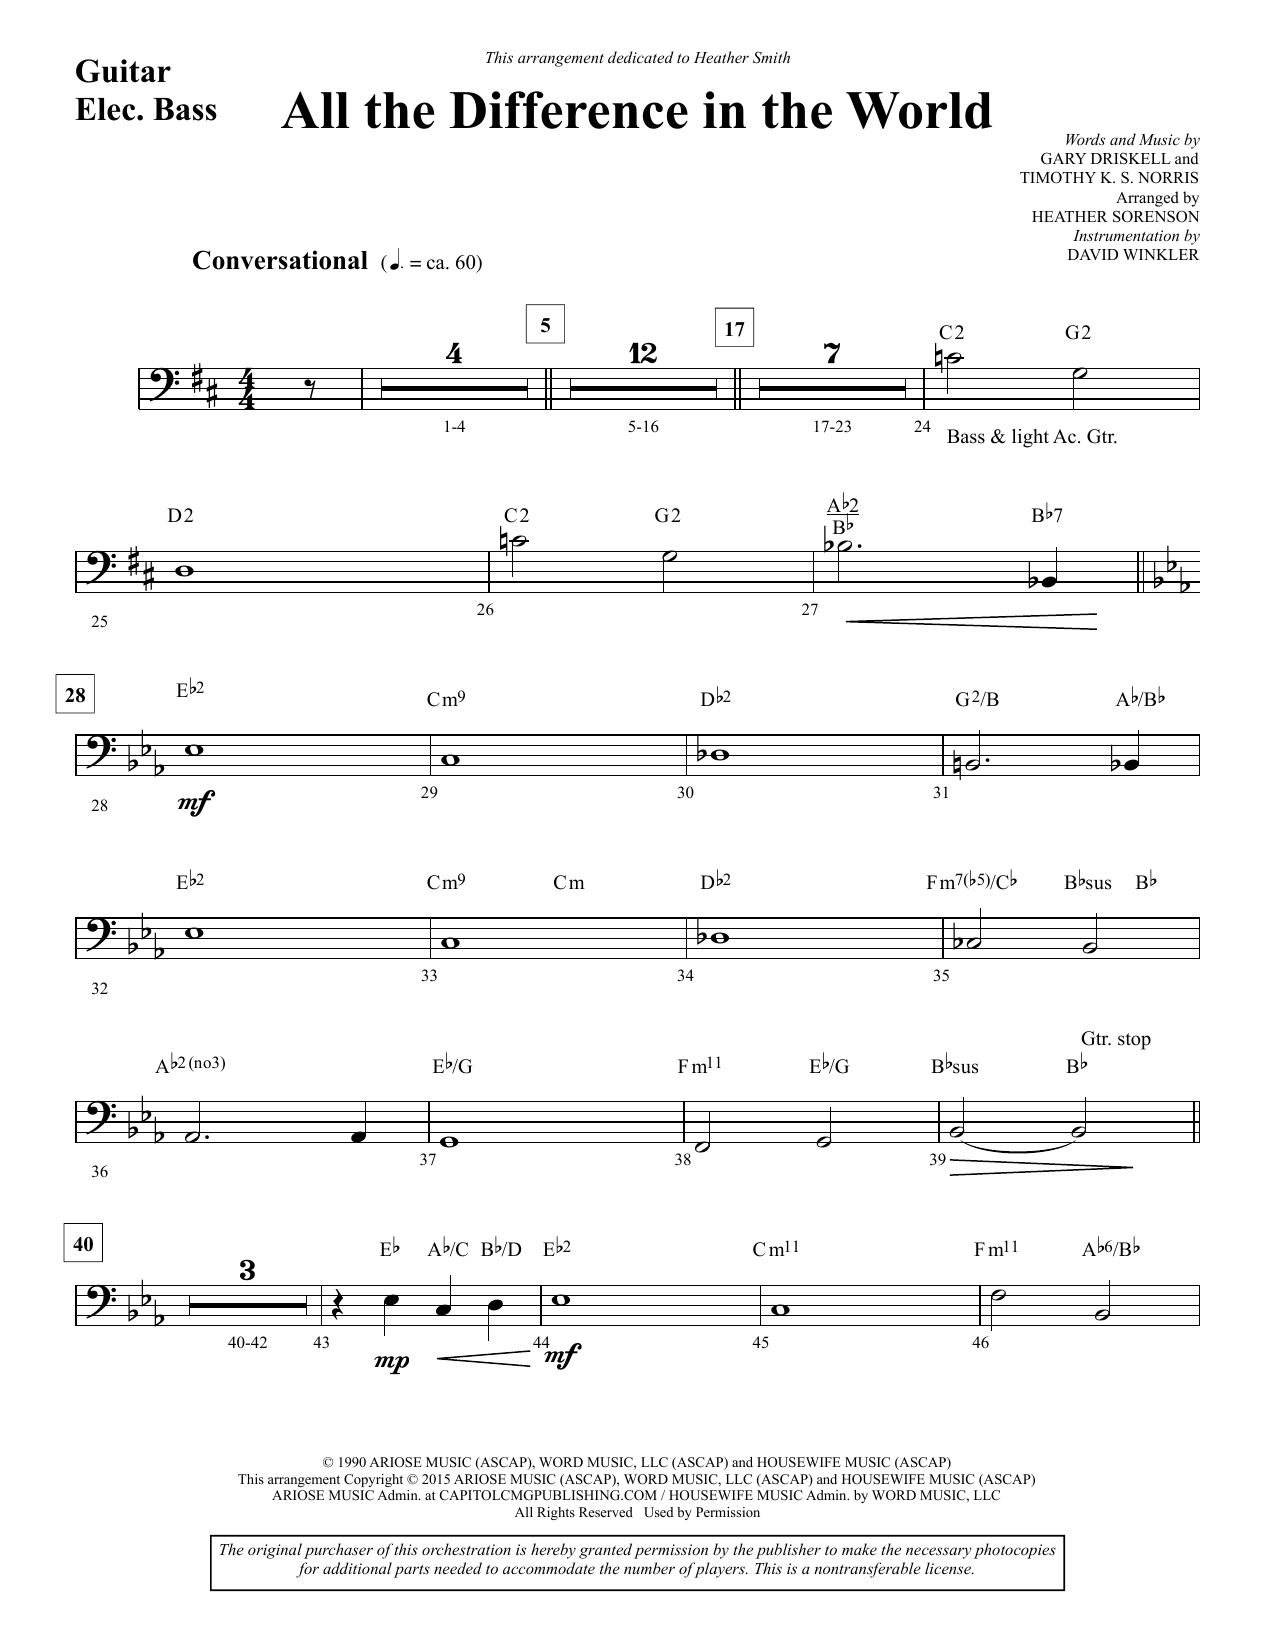 Heather Sorenson All the Difference in the World - Guitar/Electric Bass sheet music notes and chords. Download Printable PDF.